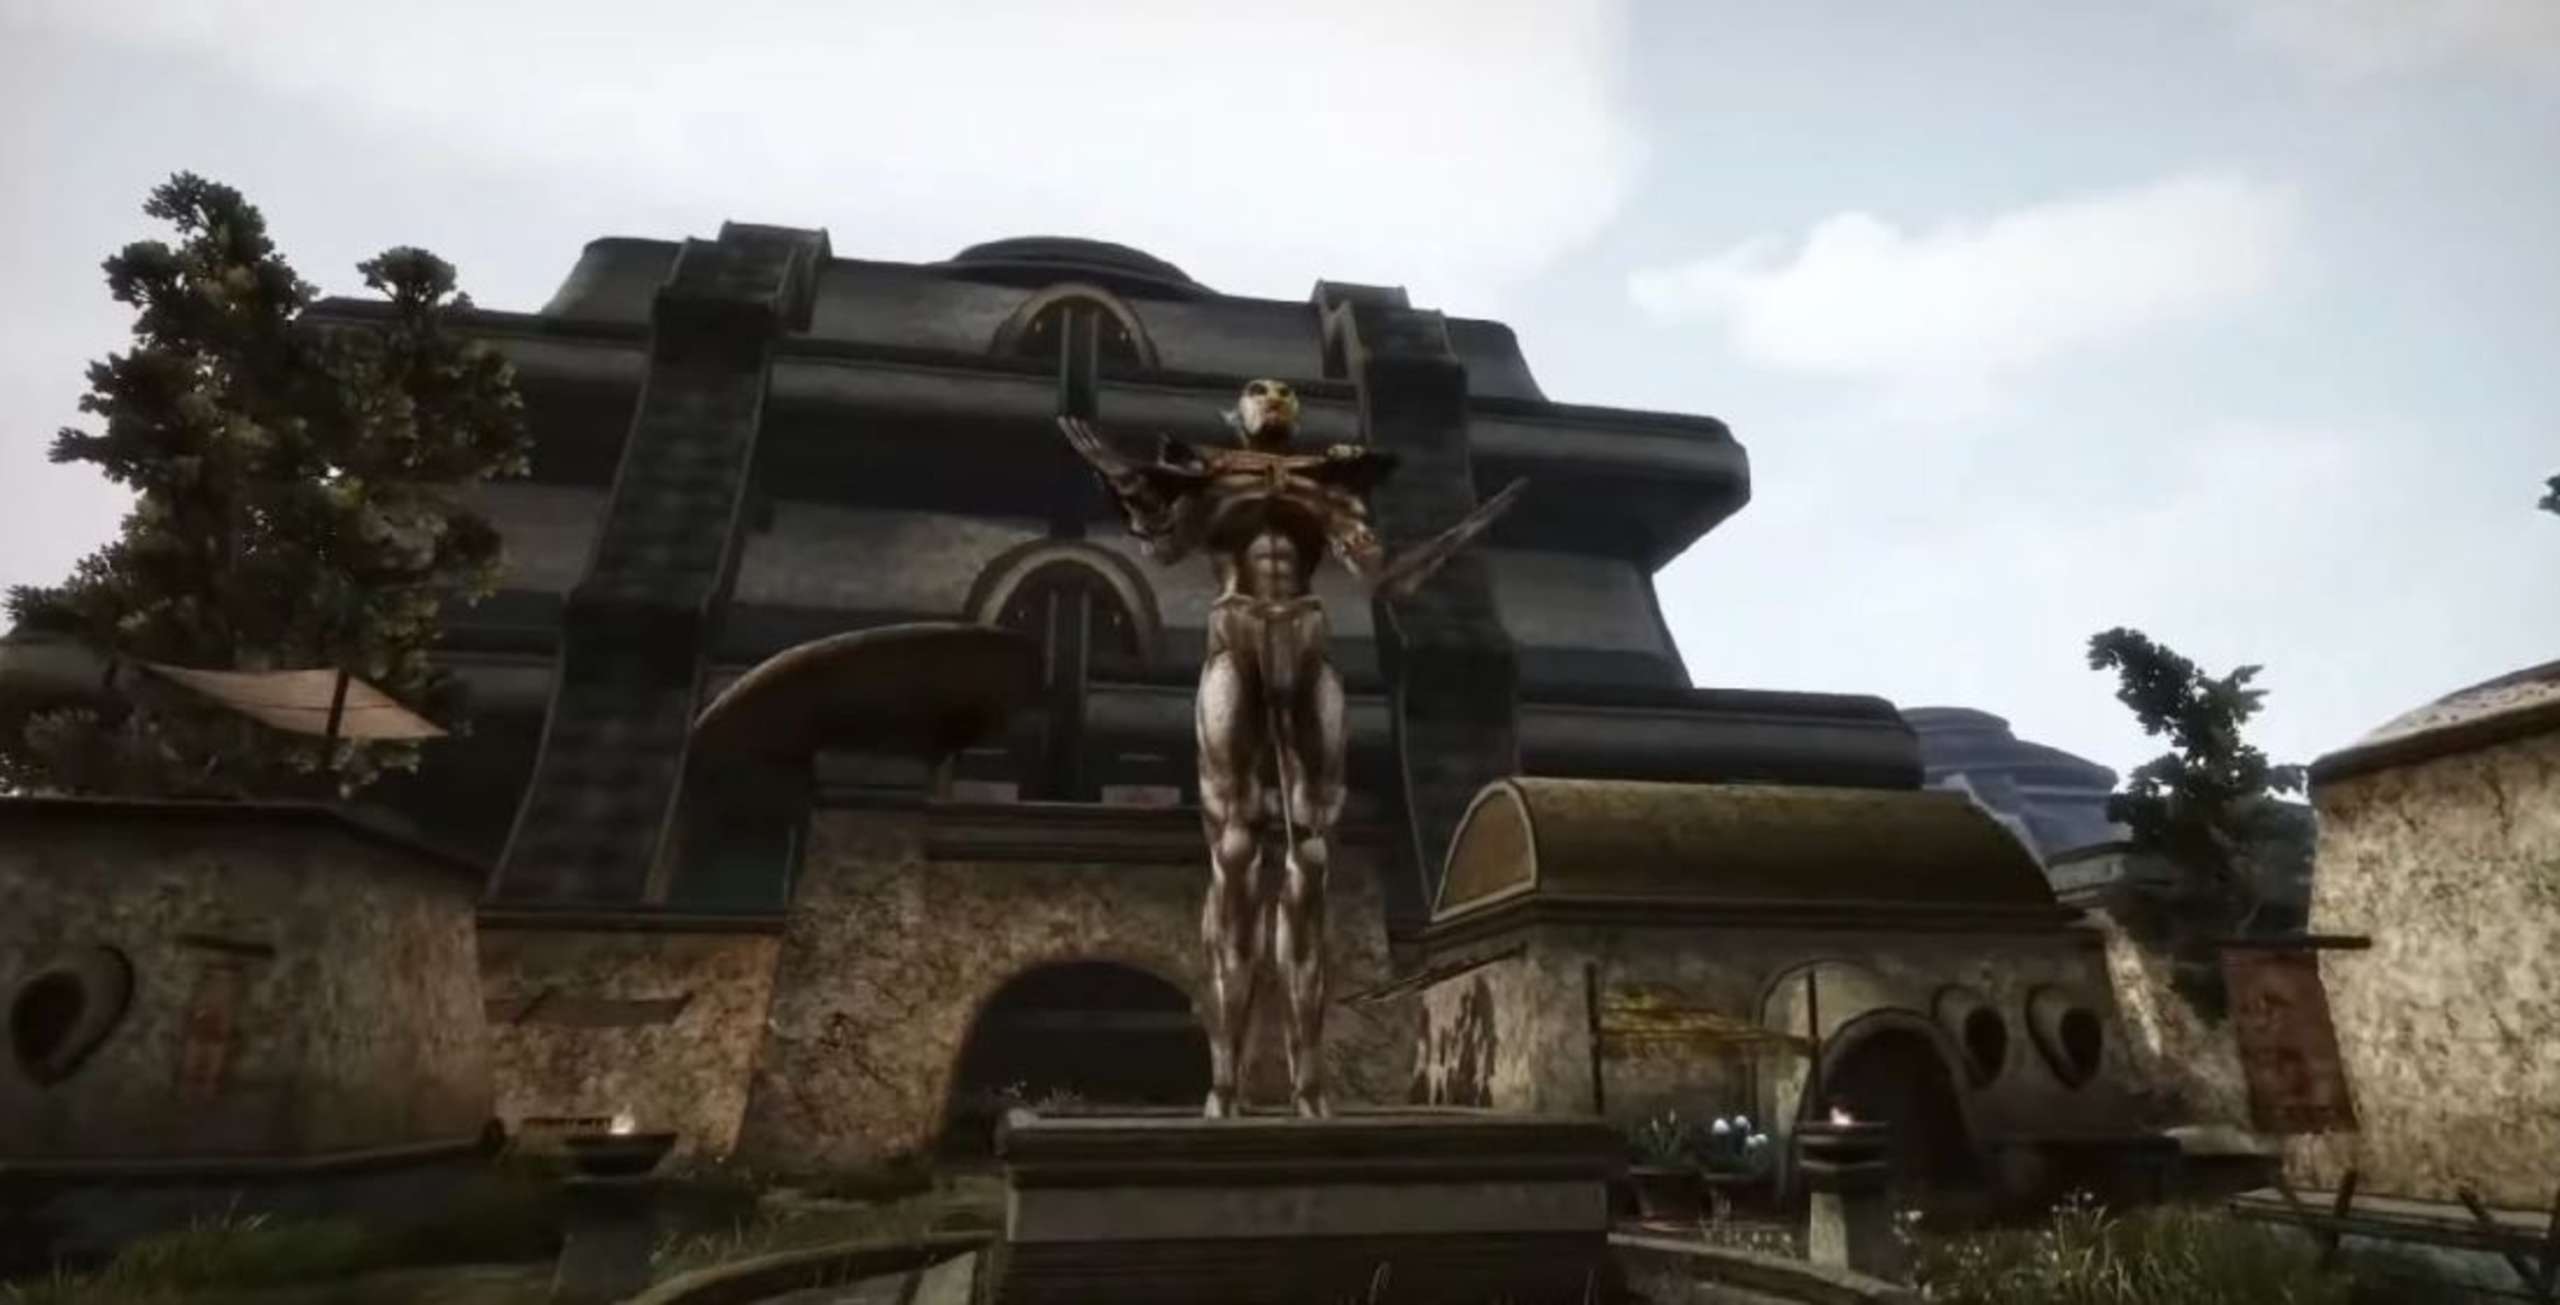 The Elder Scrolls 3 Version 6.0 Of Morrowind’s Rebirth Mod, Created By A Lone Modder, Adds A Tonne Of Fresh Material To The Vintage Game